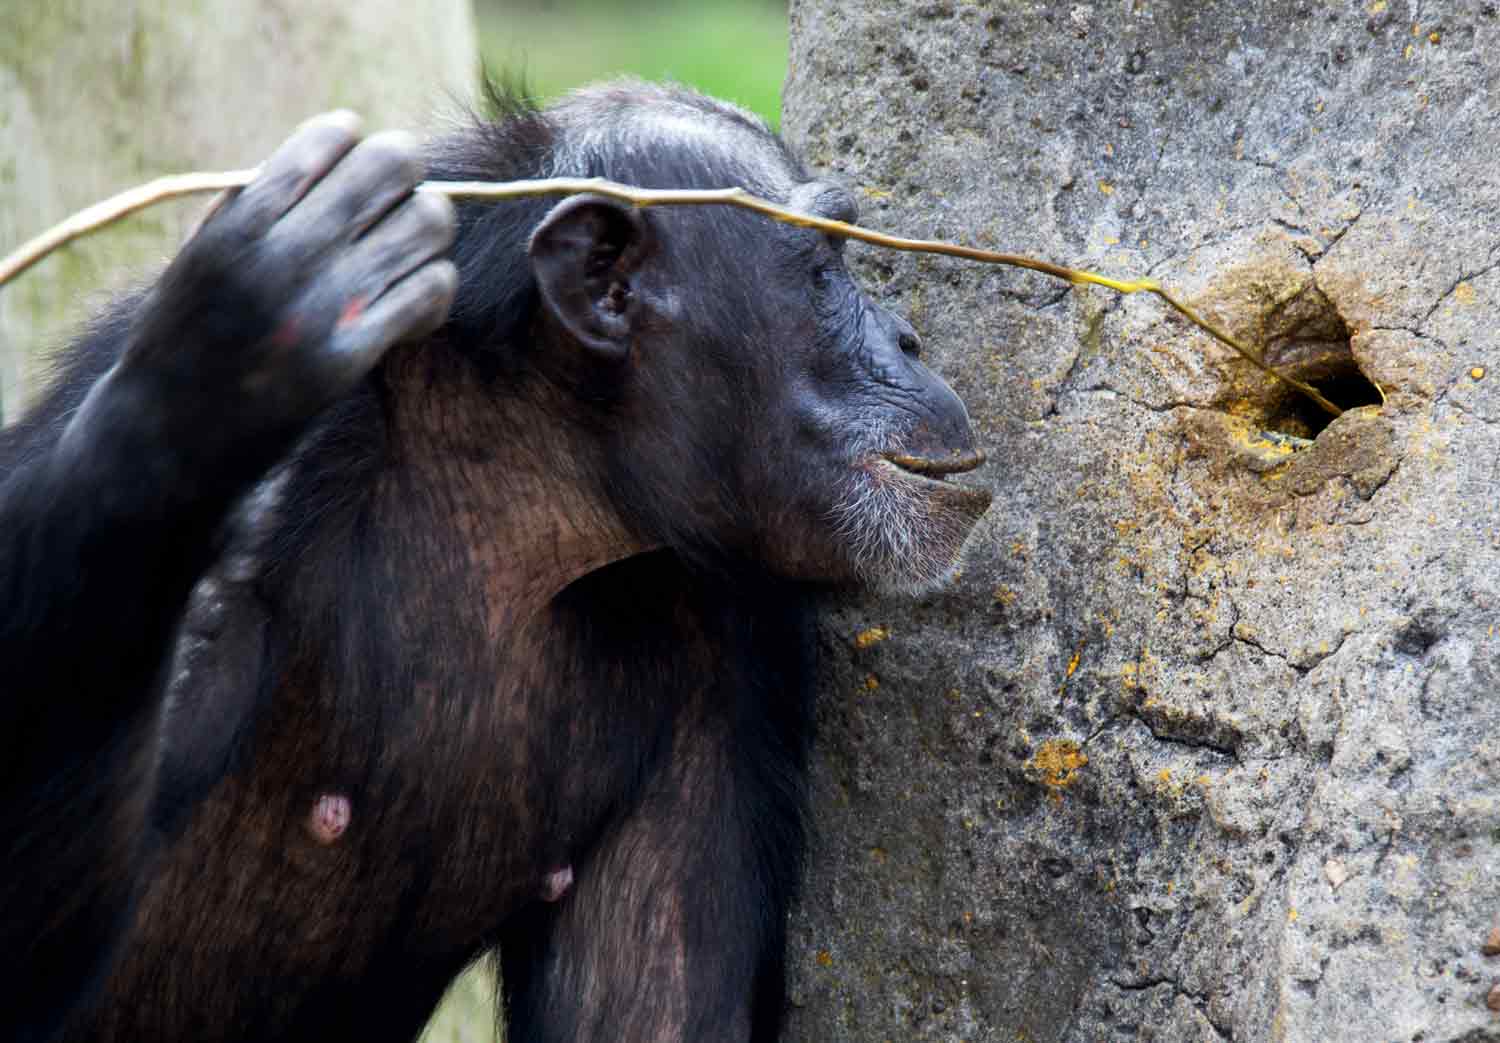 A chimpanzee places a stick into a hole in a tree trunk.